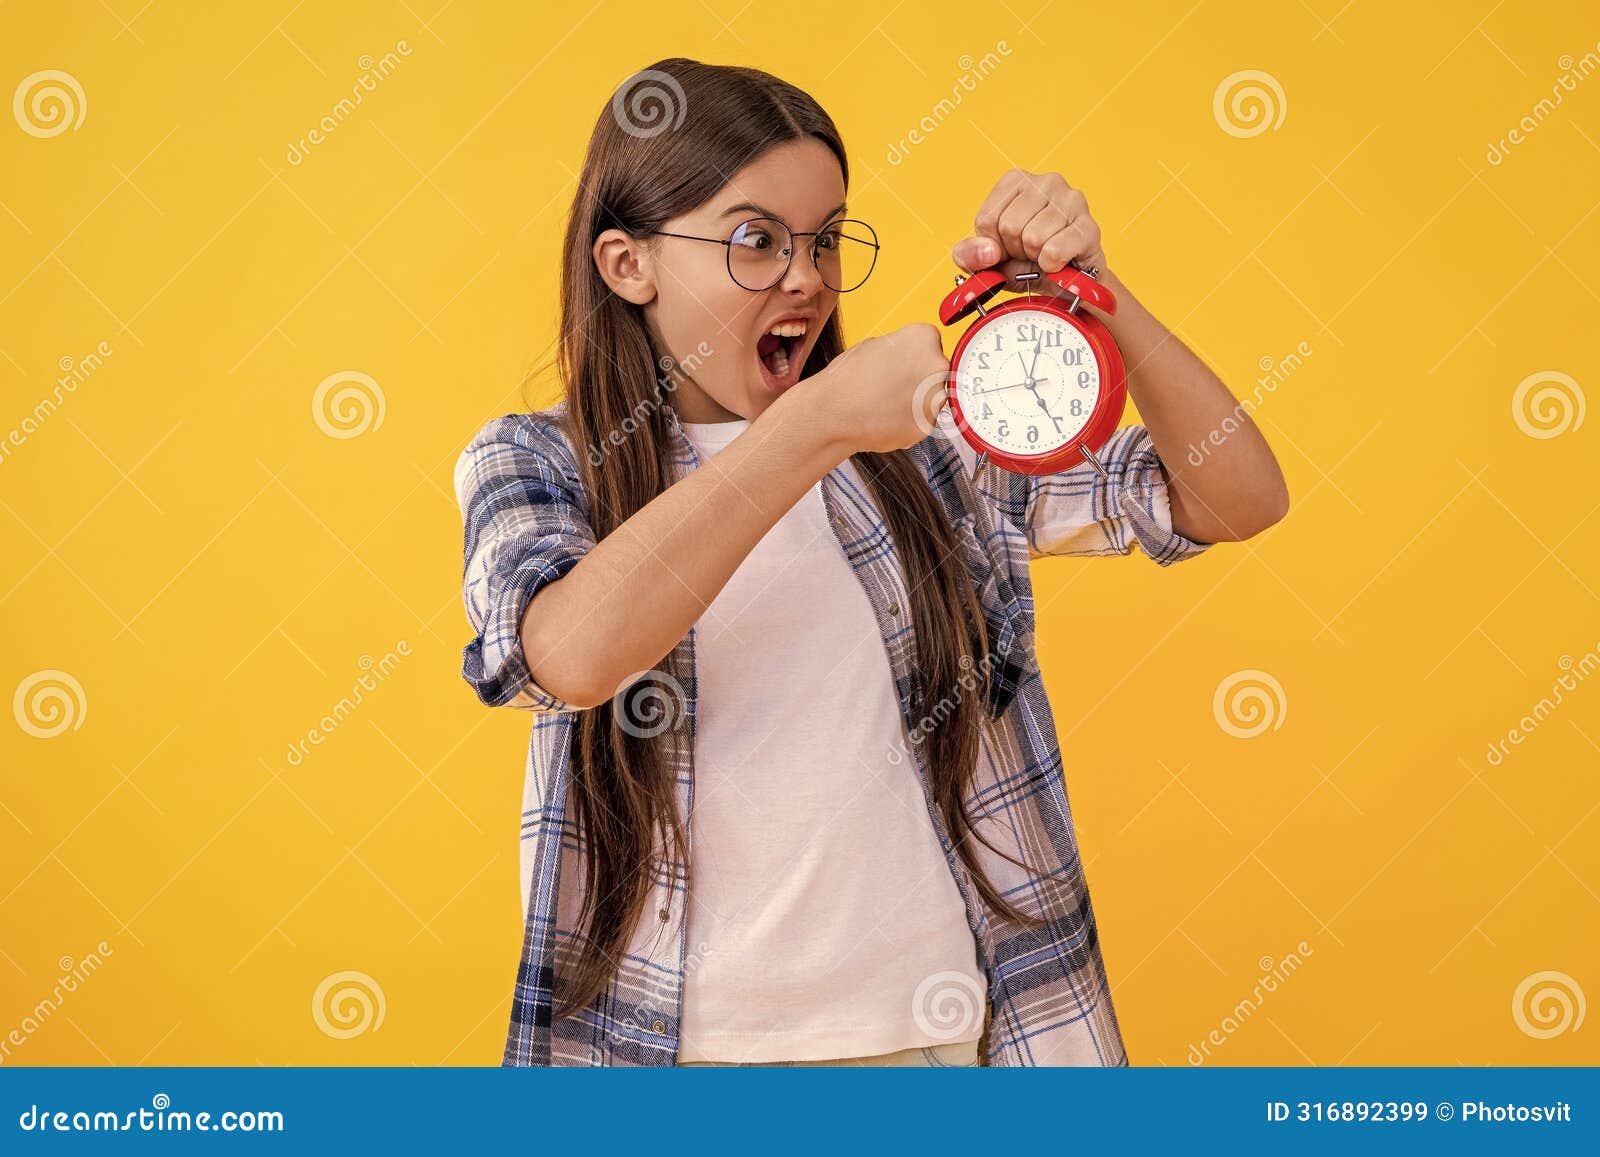 punctuality in early morning time. school time schedule. teen girl with alarm clock. time ticking for a busy teen girl